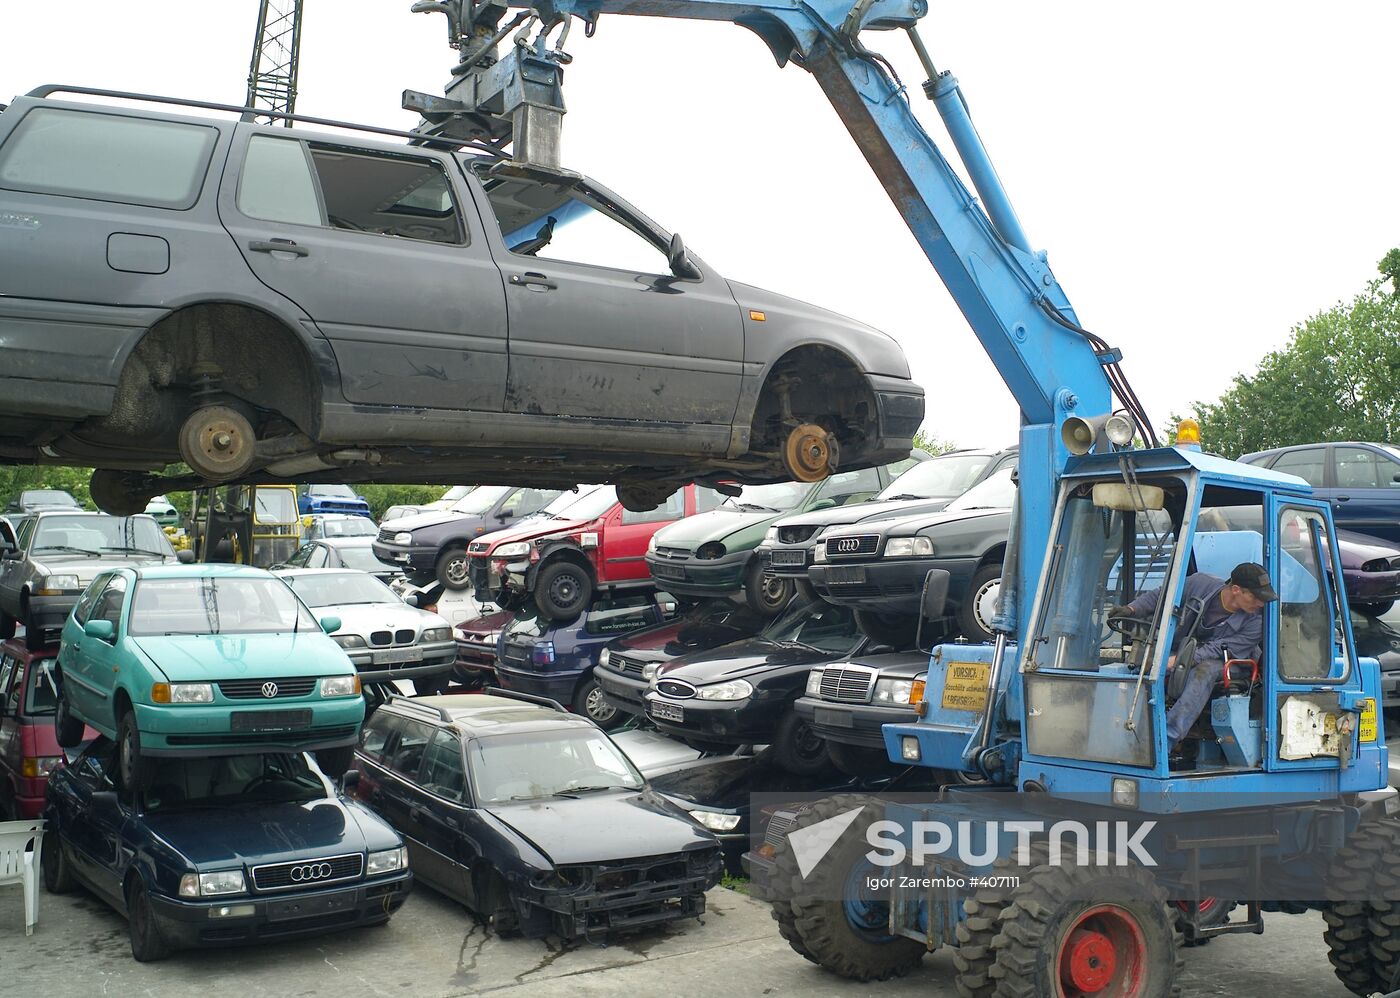 Scrap cars accepted and recycled in Kiel